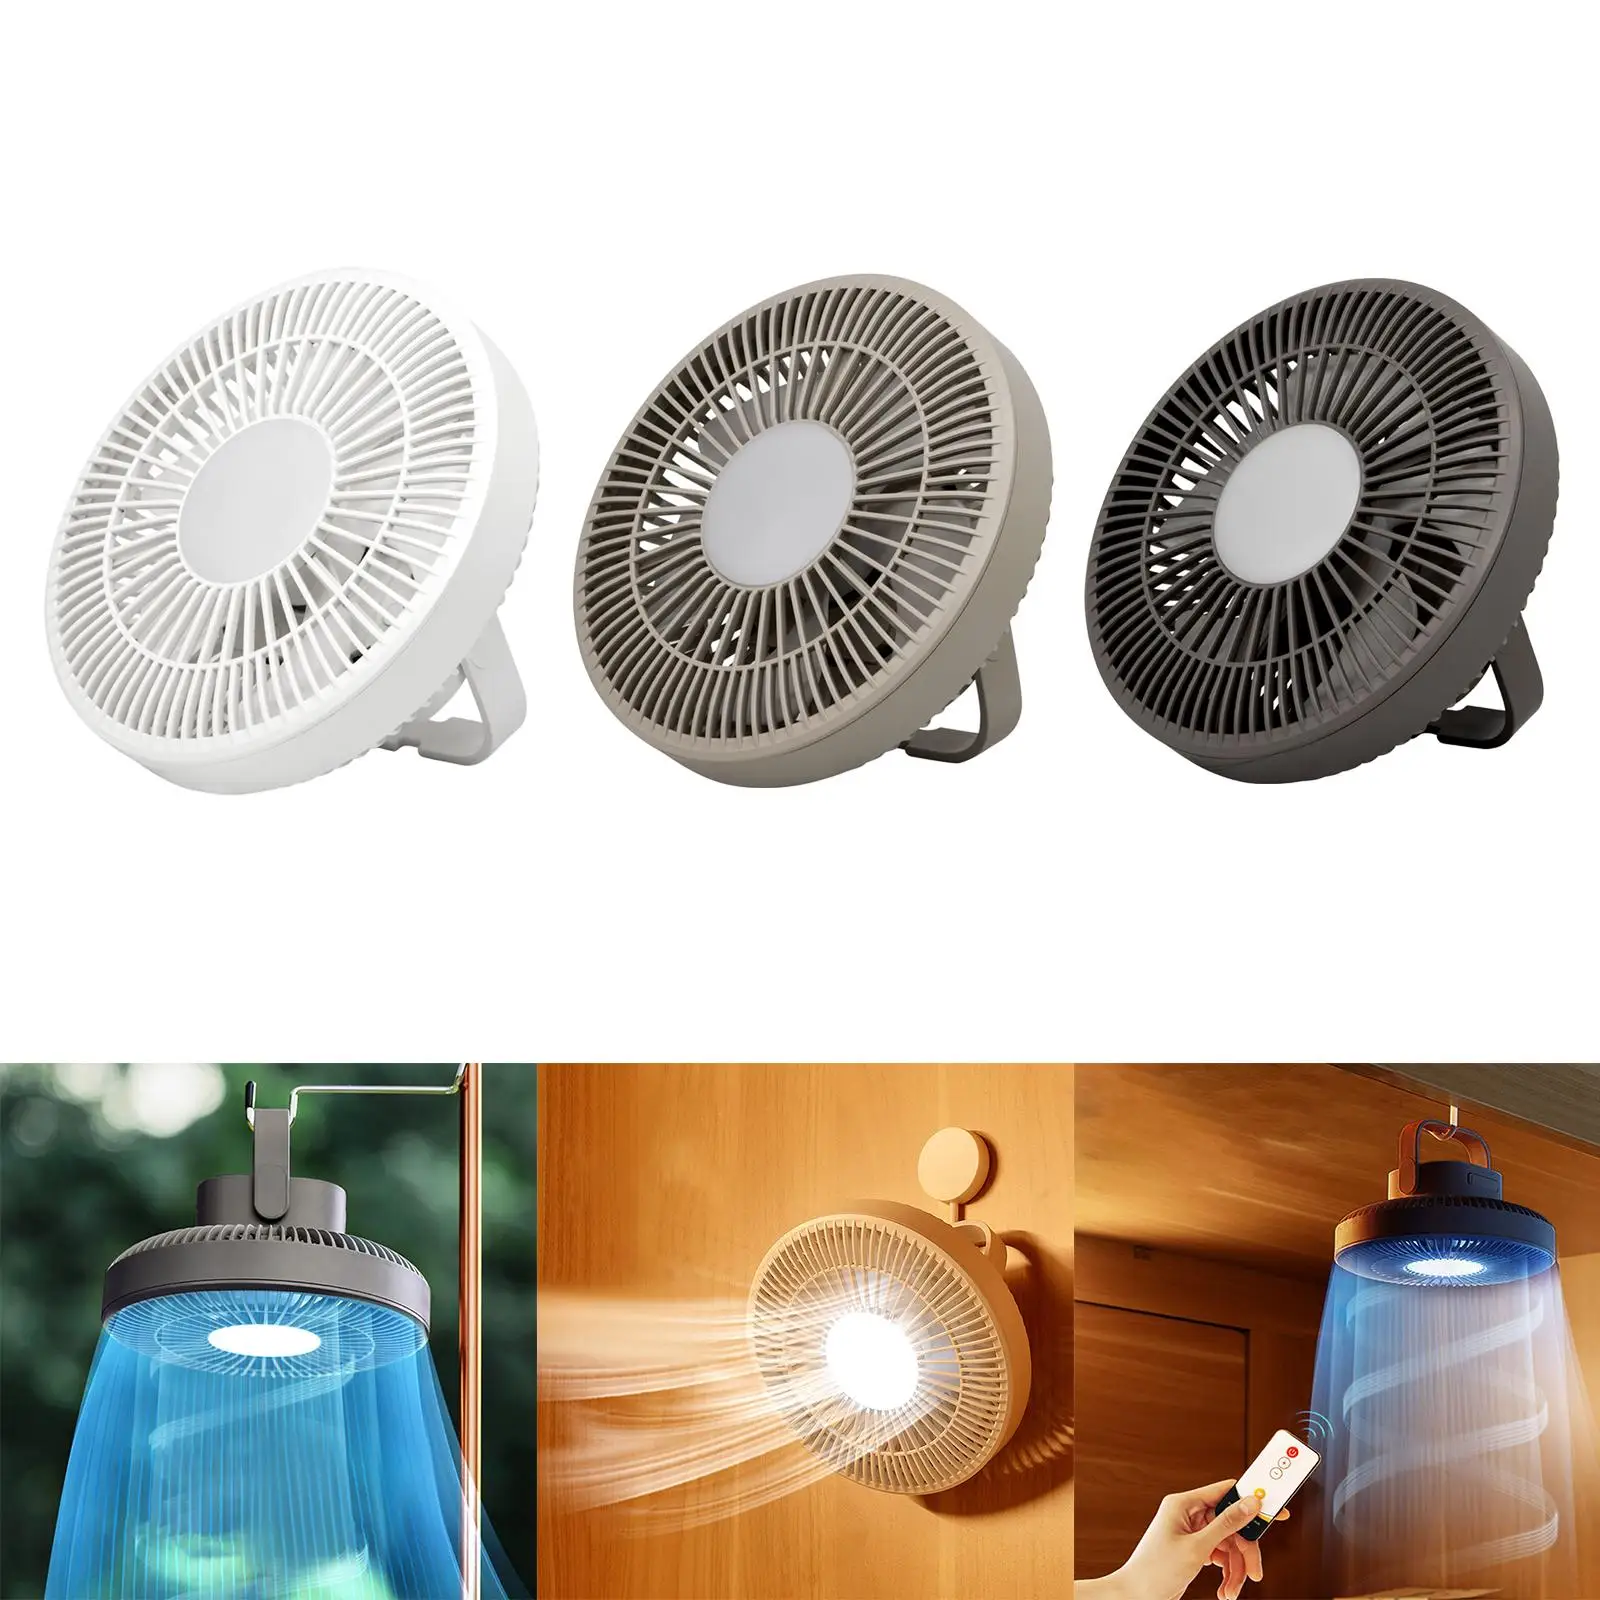 Portable Ceiling Small Cooling Camping Fan with Light for Home Office Travel